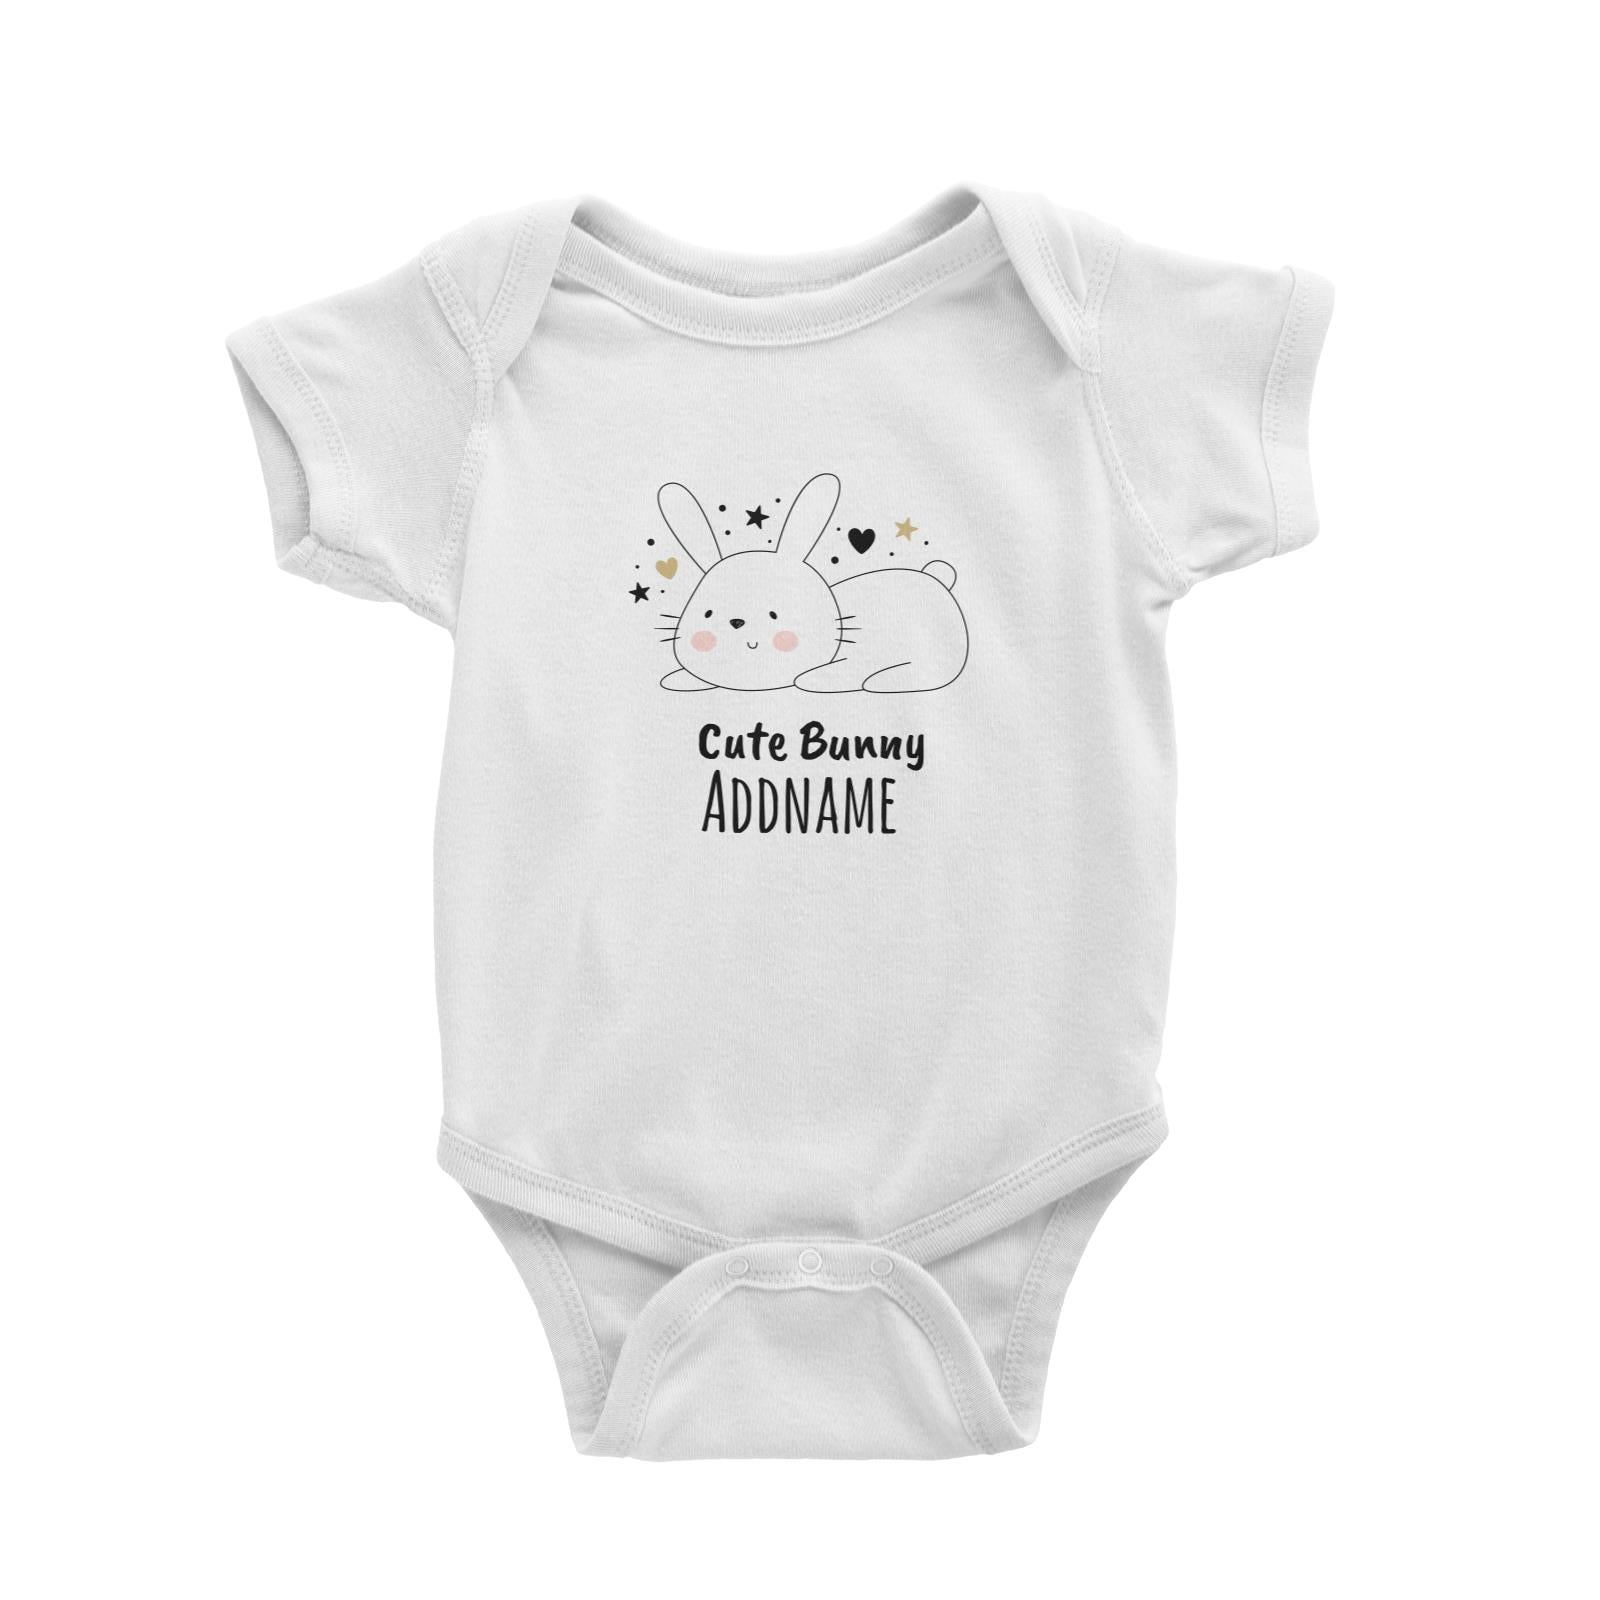 Drawn Adorable Animals Cute Bunny Addname Baby Romper